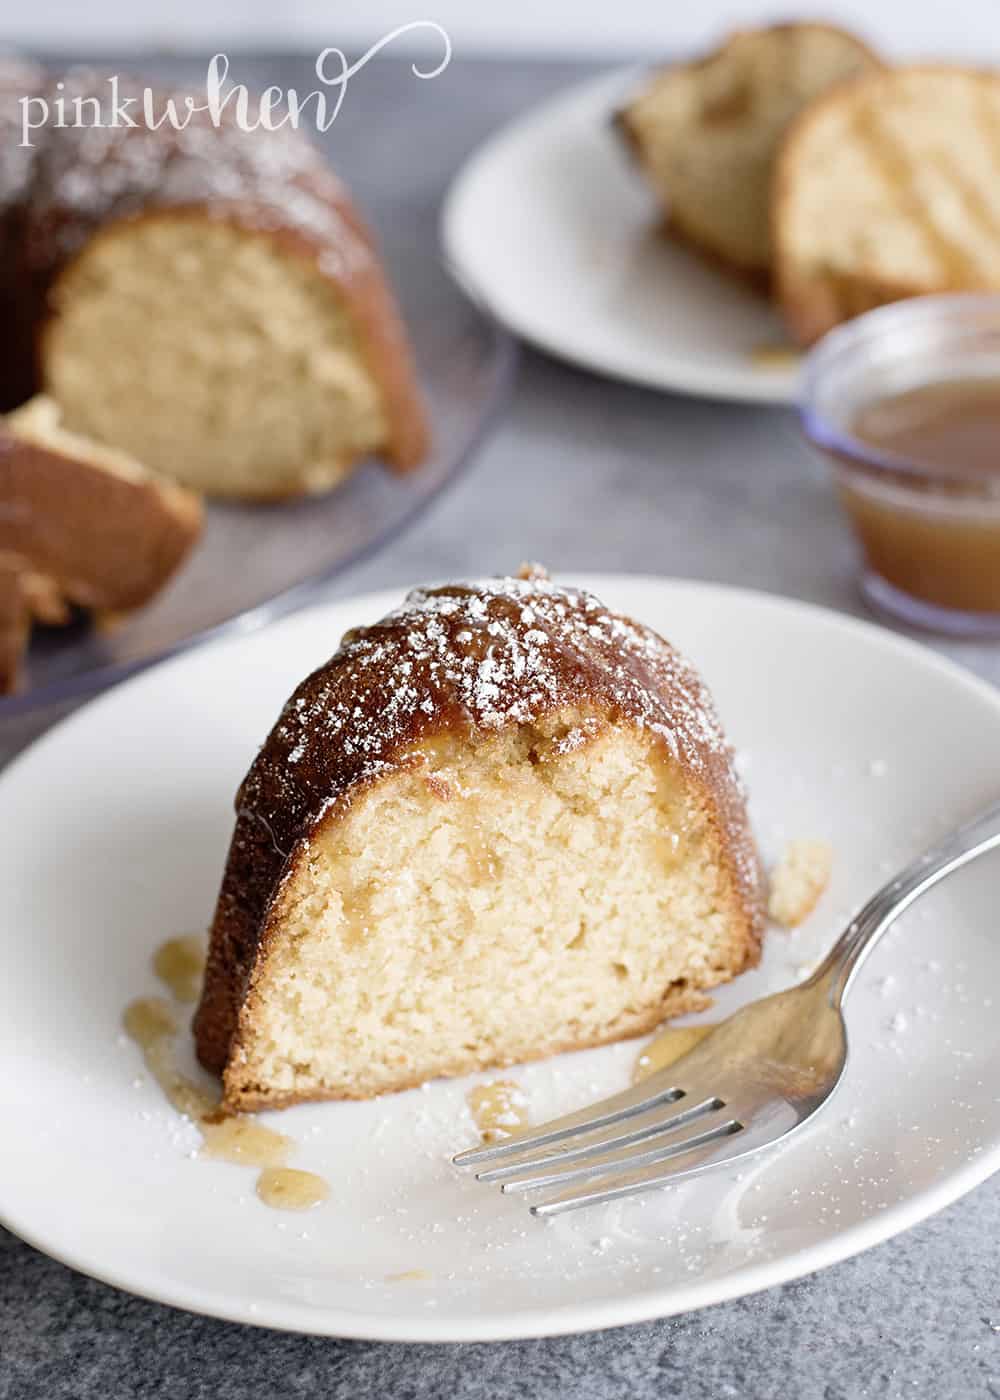 This BROWN SUGAR BUNDT CAKE is a must do recipe. It's one of the best, moist cake recipes I have had in a LONG time. Check it out! #bundtcake #cakerecipe #dessert